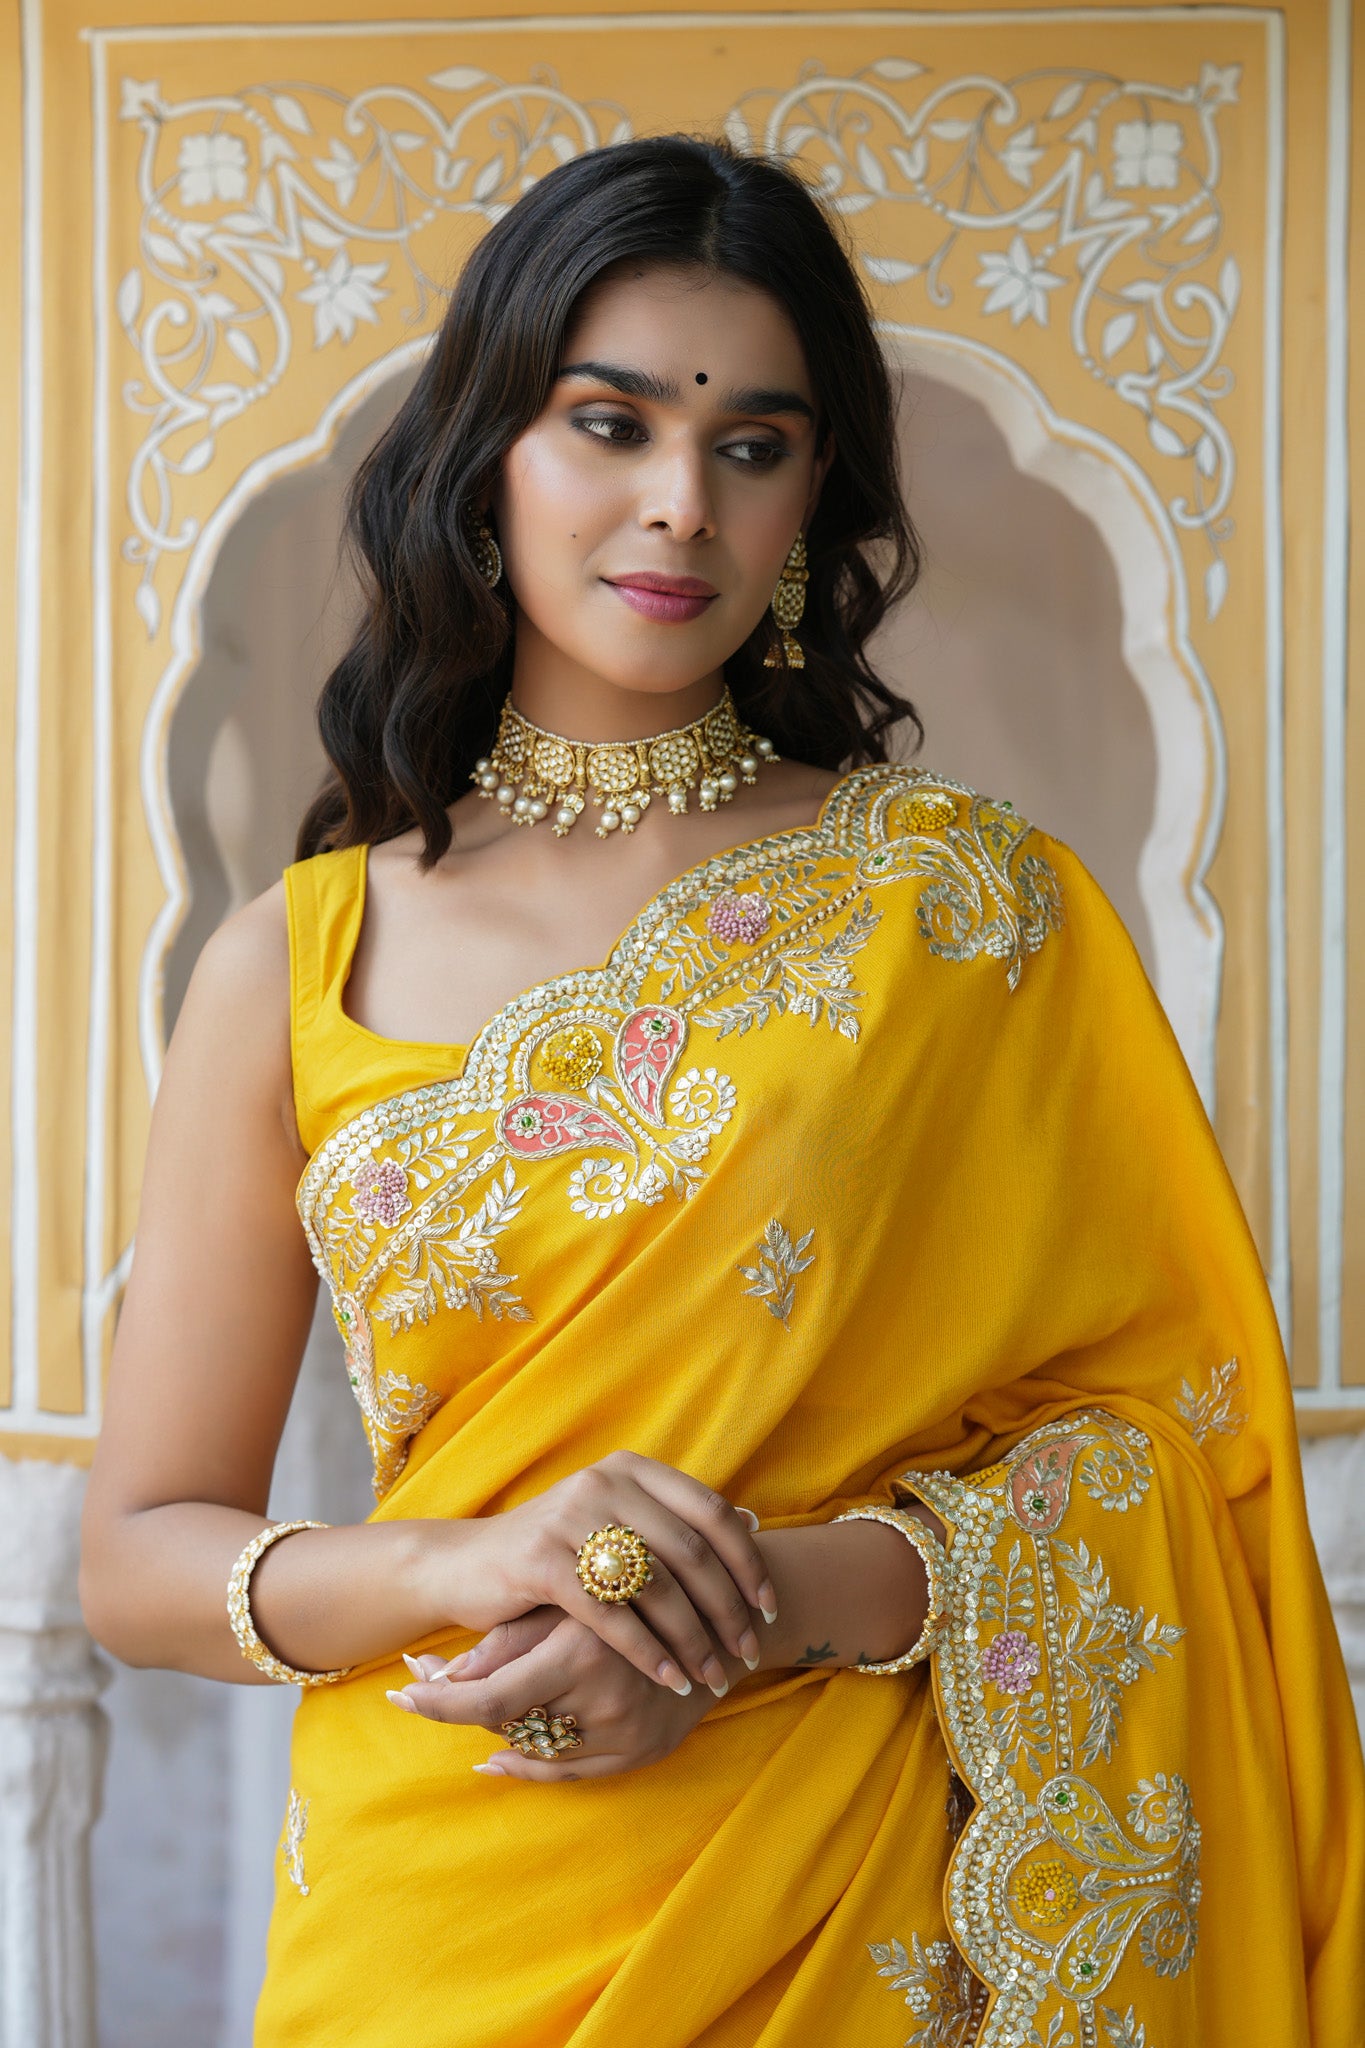 Buy beautiful yellow tussar georgette saree online in USA with hand embroidered border. Make a fashion statement at weddings with stunning designer sarees, embroidered sarees with blouse, wedding sarees, handloom sarees from Pure Elegance Indian fashion store in USA.-closeup